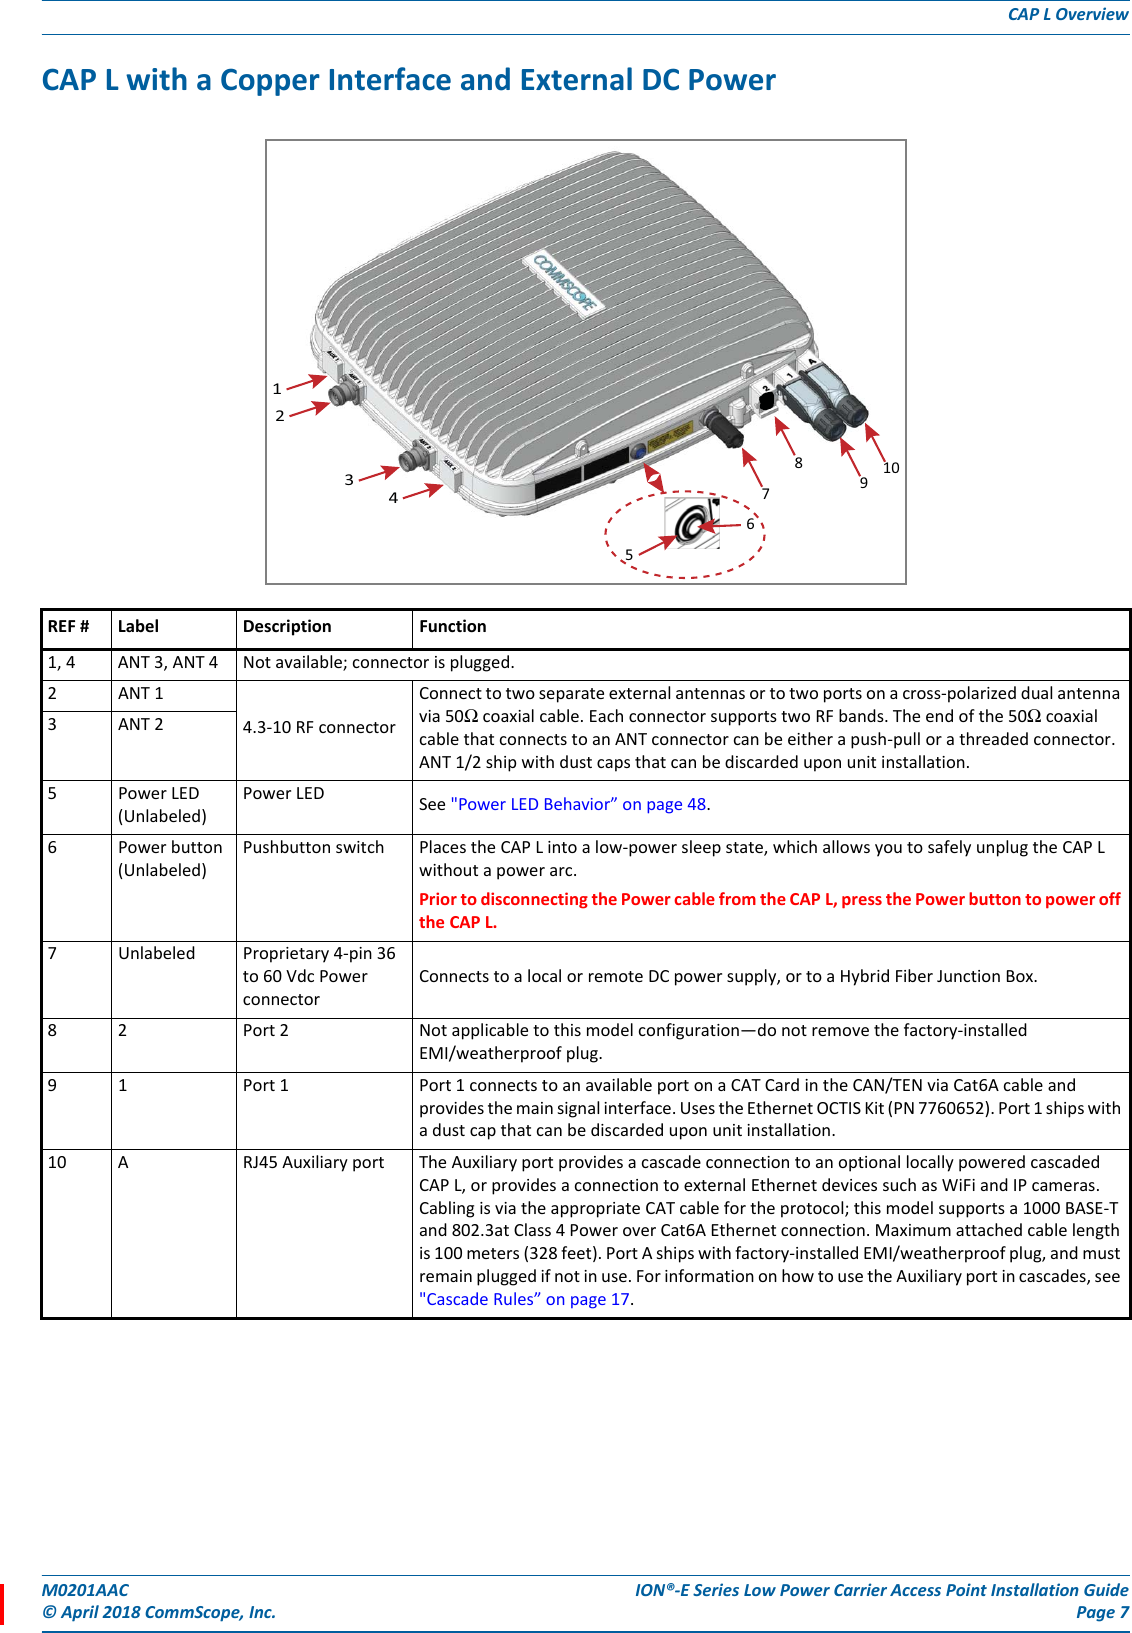 M0201AAC ION®-E Series Low Power Carrier Access Point Installation Guide© April 2018 CommScope, Inc. Page 7CAP L OverviewCAP L with a Copper Interface and External DC PowerREF # Label Description Function1, 4 ANT 3, ANT 4 Not available; connector is plugged.2ANT 1 4.3-10 RF connectorConnect to two separate external antennas or to two ports on a cross-polarized dual antenna via 50Ω coaxial cable. Each connector supports two RF bands. The end of the 50Ω coaxial cable that connects to an ANT connector can be either a push-pull or a threaded connector. ANT 1/2 ship with dust caps that can be discarded upon unit installation. 3ANT 25Power LED (Unlabeled)Power LED See &quot;Power LED Behavior” on page 48.6 Power button (Unlabeled)Pushbutton switch Places the CAP L into a low-power sleep state, which allows you to safely unplug the CAP L without a power arc. Prior to disconnecting the Power cable from the CAP L, press the Power button to power off the CAP L. 7 Unlabeled  Proprietary 4-pin 36 to 60 Vdc Power connectorConnects to a local or remote DC power supply, or to a Hybrid Fiber Junction Box. 8 2  Port 2 Not applicable to this model configuration—do not remove the factory-installed EMI/weatherproof plug.9 1  Port 1 Port 1 connects to an available port on a CAT Card in the CAN/TEN via Cat6A cable and provides the main signal interface. Uses the Ethernet OCTIS Kit (PN 7760652). Port 1 ships with a dust cap that can be discarded upon unit installation.10 A RJ45 Auxiliary port The Auxiliary port provides a cascade connection to an optional locally powered cascaded CAP L, or provides a connection to external Ethernet devices such as WiFi and IP cameras. Cabling is via the appropriate CAT cable for the protocol; this model supports a 1000 BASE-T and 802.3at Class 4 Power over Cat6A Ethernet connection. Maximum attached cable length is 100 meters (328 feet). Port A ships with factory-installed EMI/weatherproof plug, and must remain plugged if not in use. For information on how to use the Auxiliary port in cascades, see &quot;Cascade Rules” on page 17.12347891056